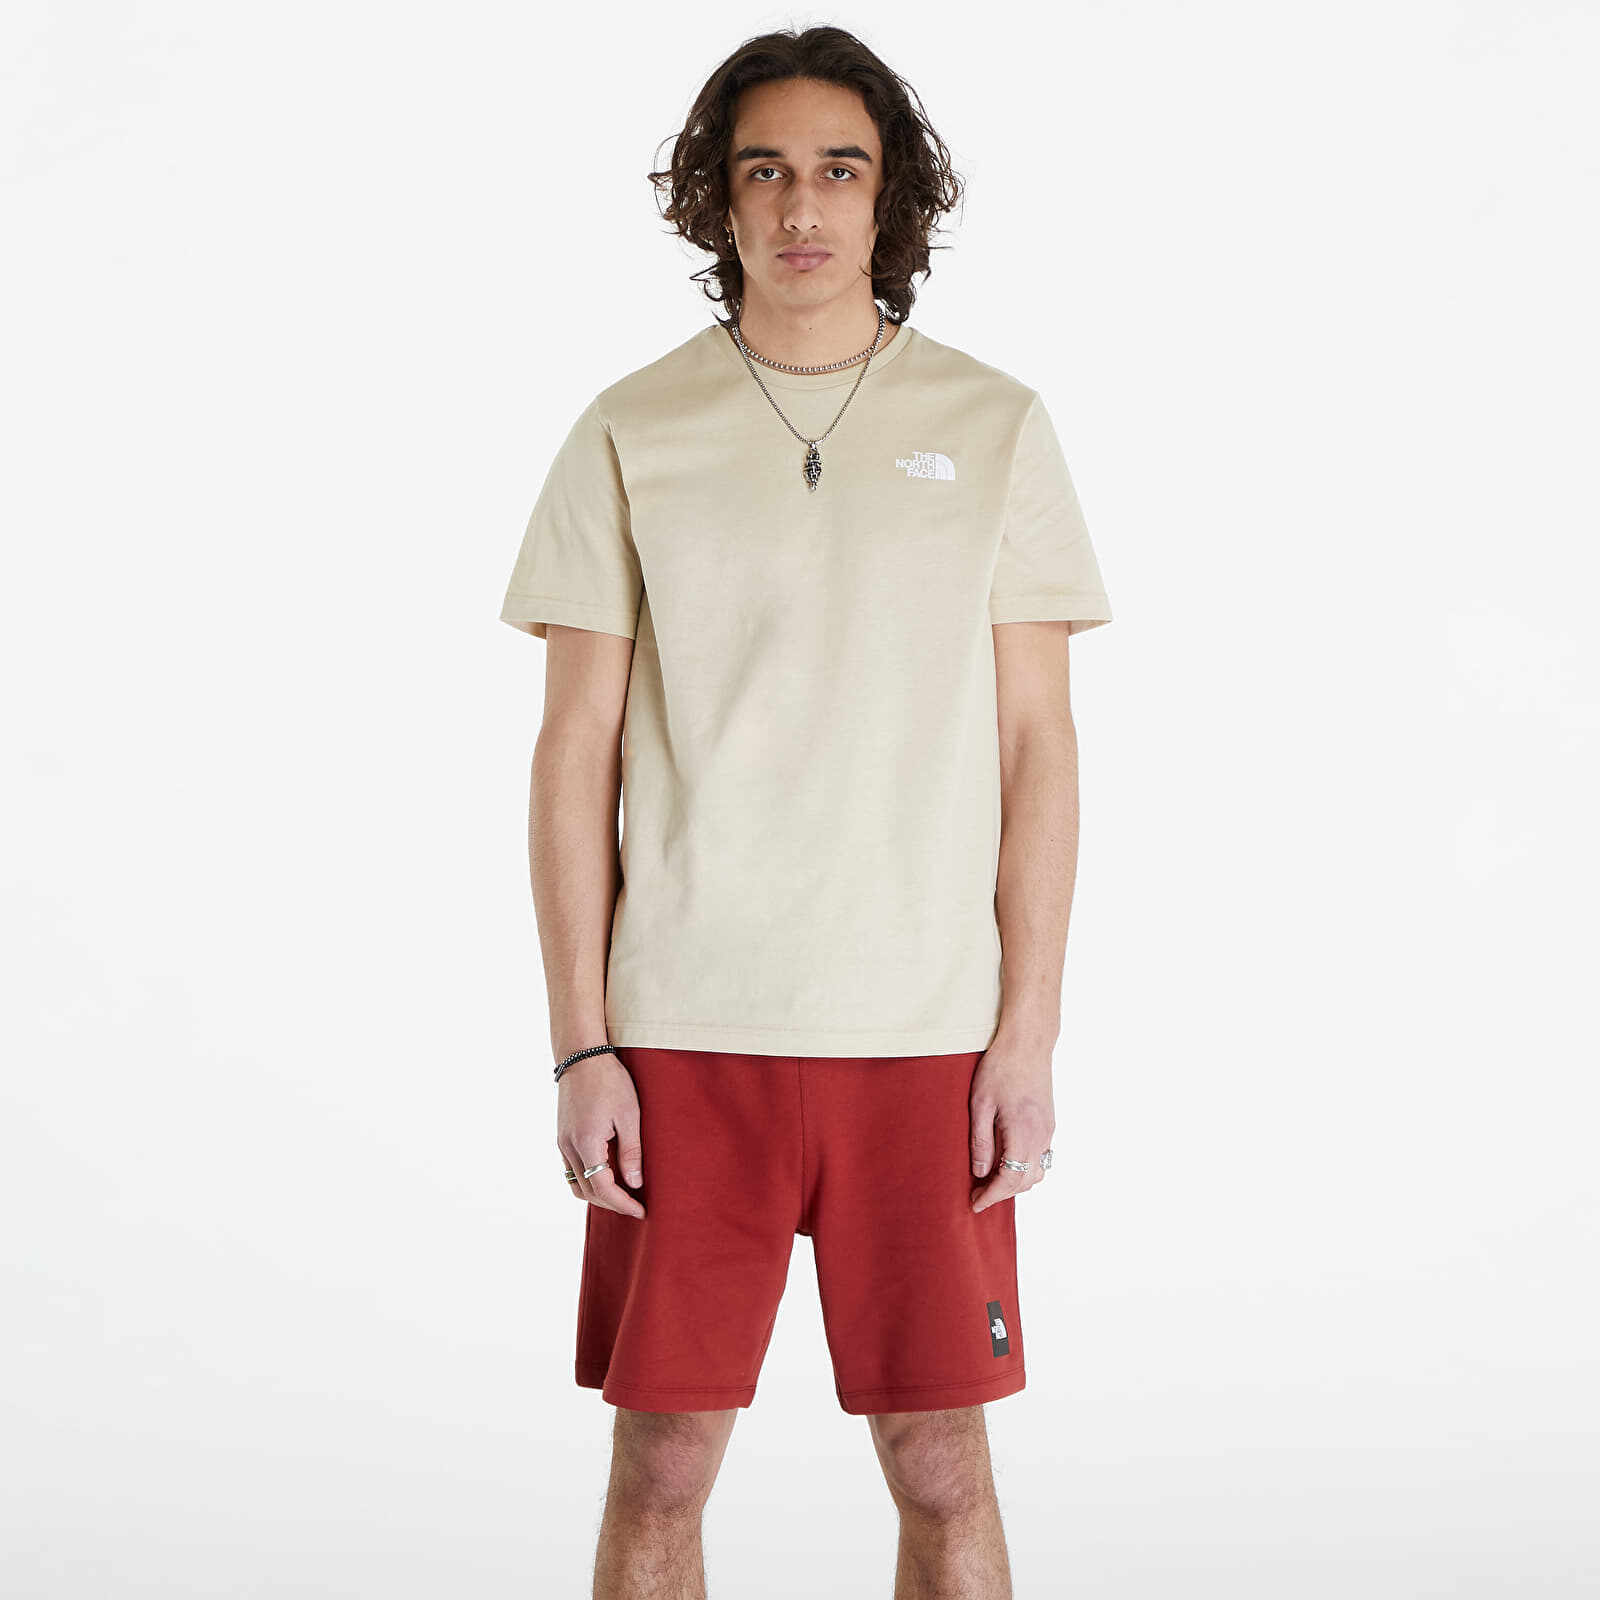 The North Face Redbox Tee Gravel